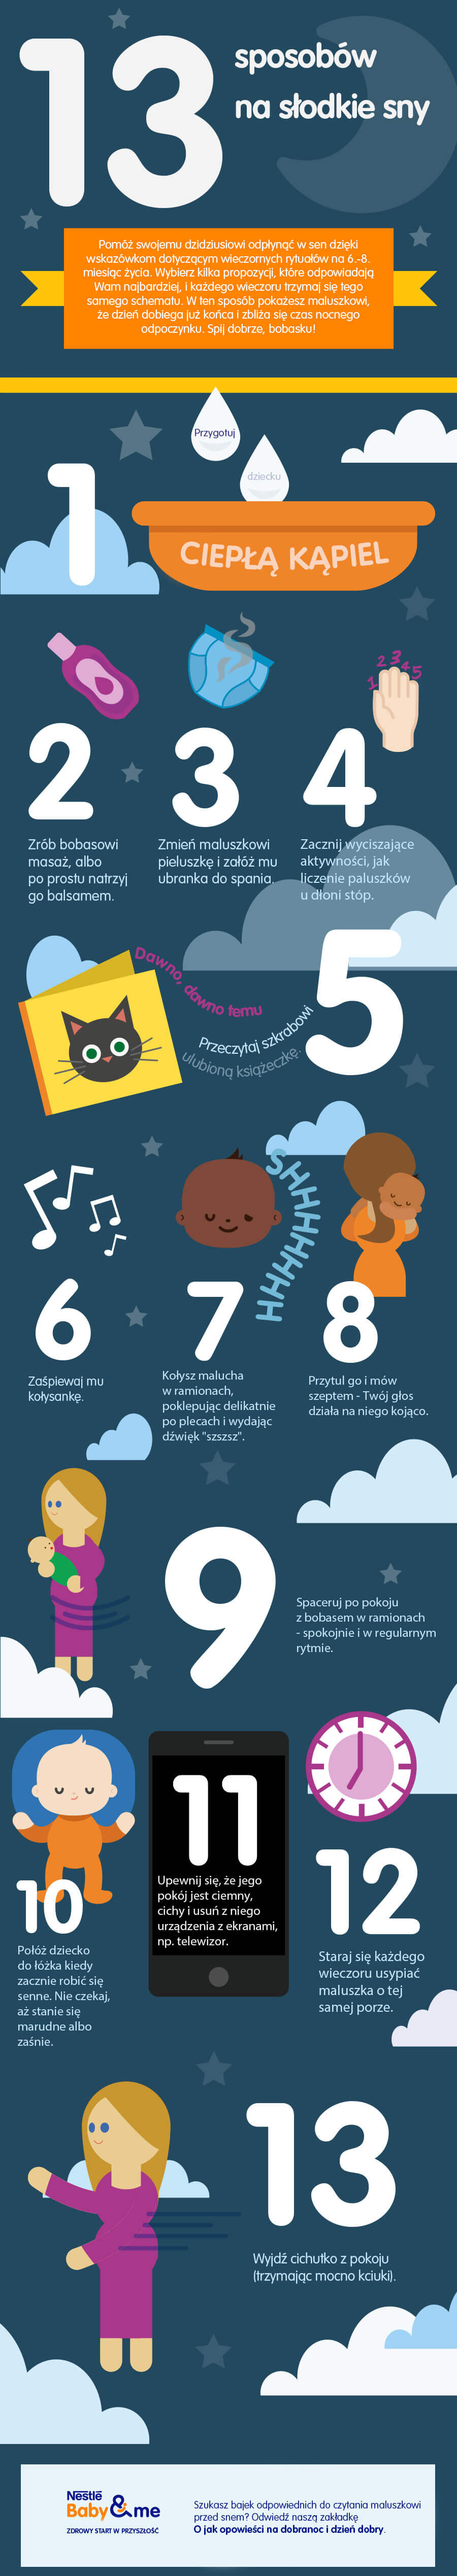 13 tips for sweet dreams